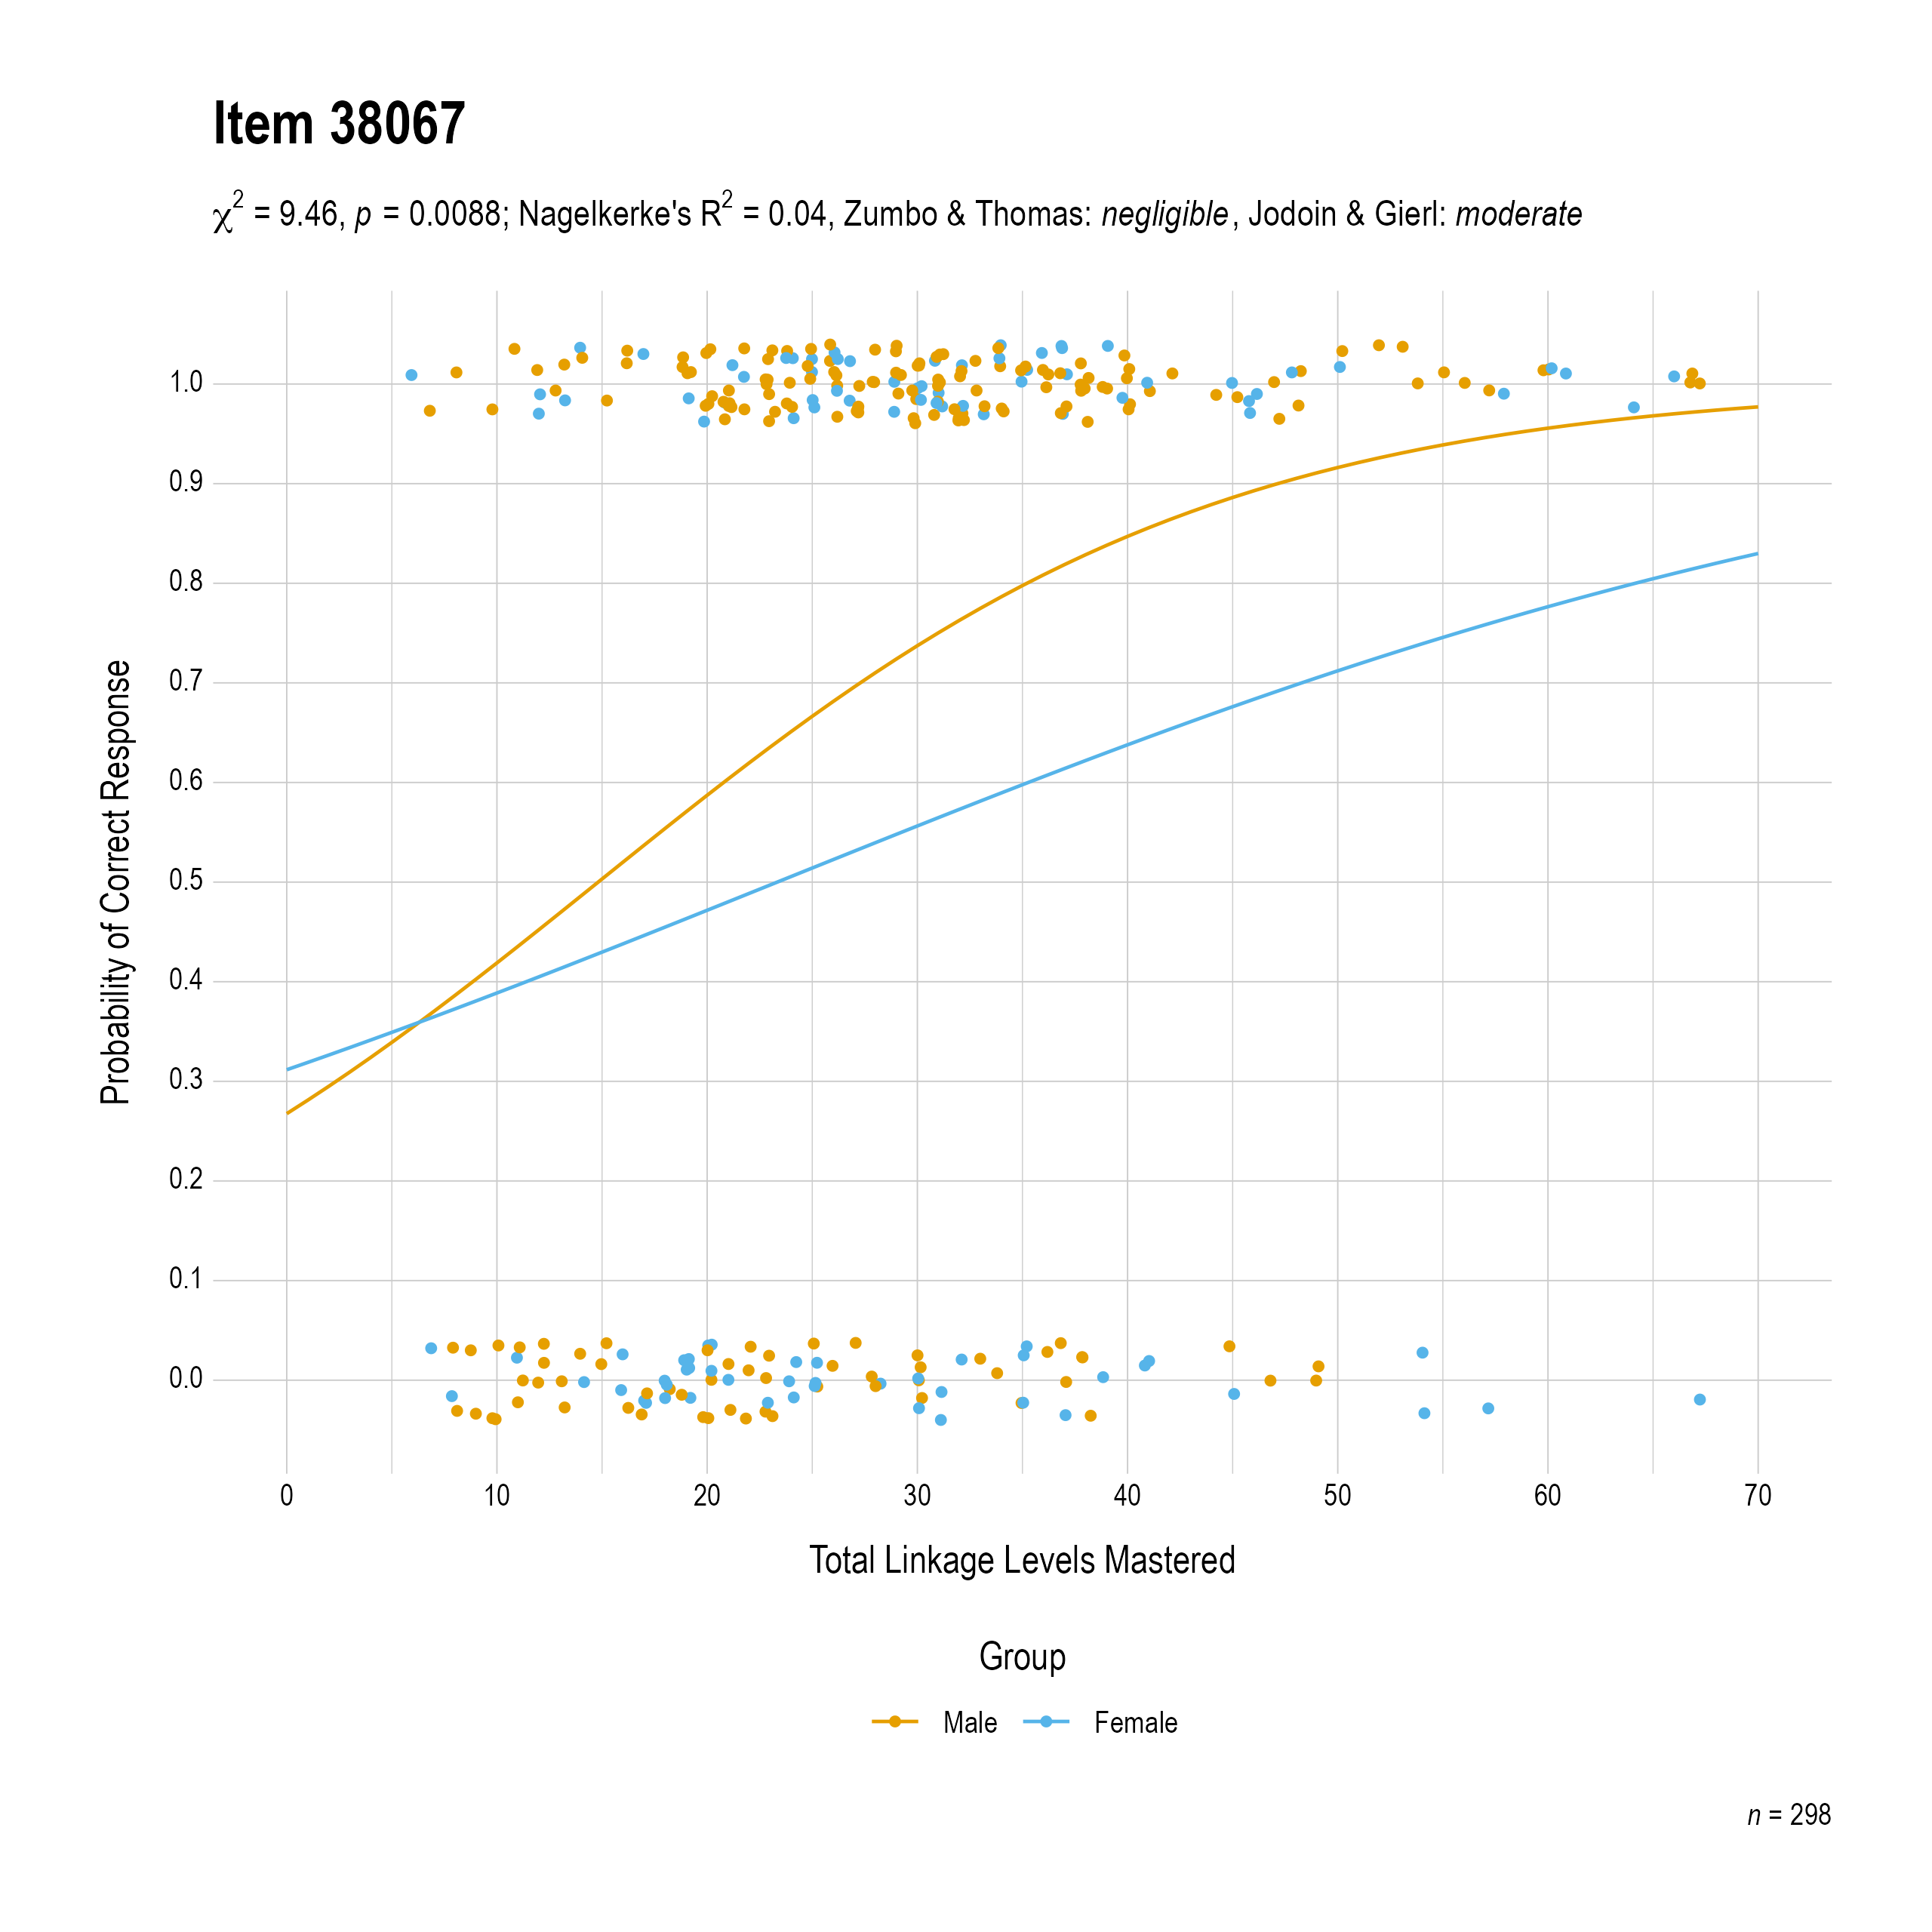 The plot of the combined gender differential item function evidence for English language arts item 38067. The figure contains points shaded by group. The figure also contains a logistic regression curve for each group. The total linkage levels mastered in is on the x-axis, and the probability of a correct response is on the y-axis.